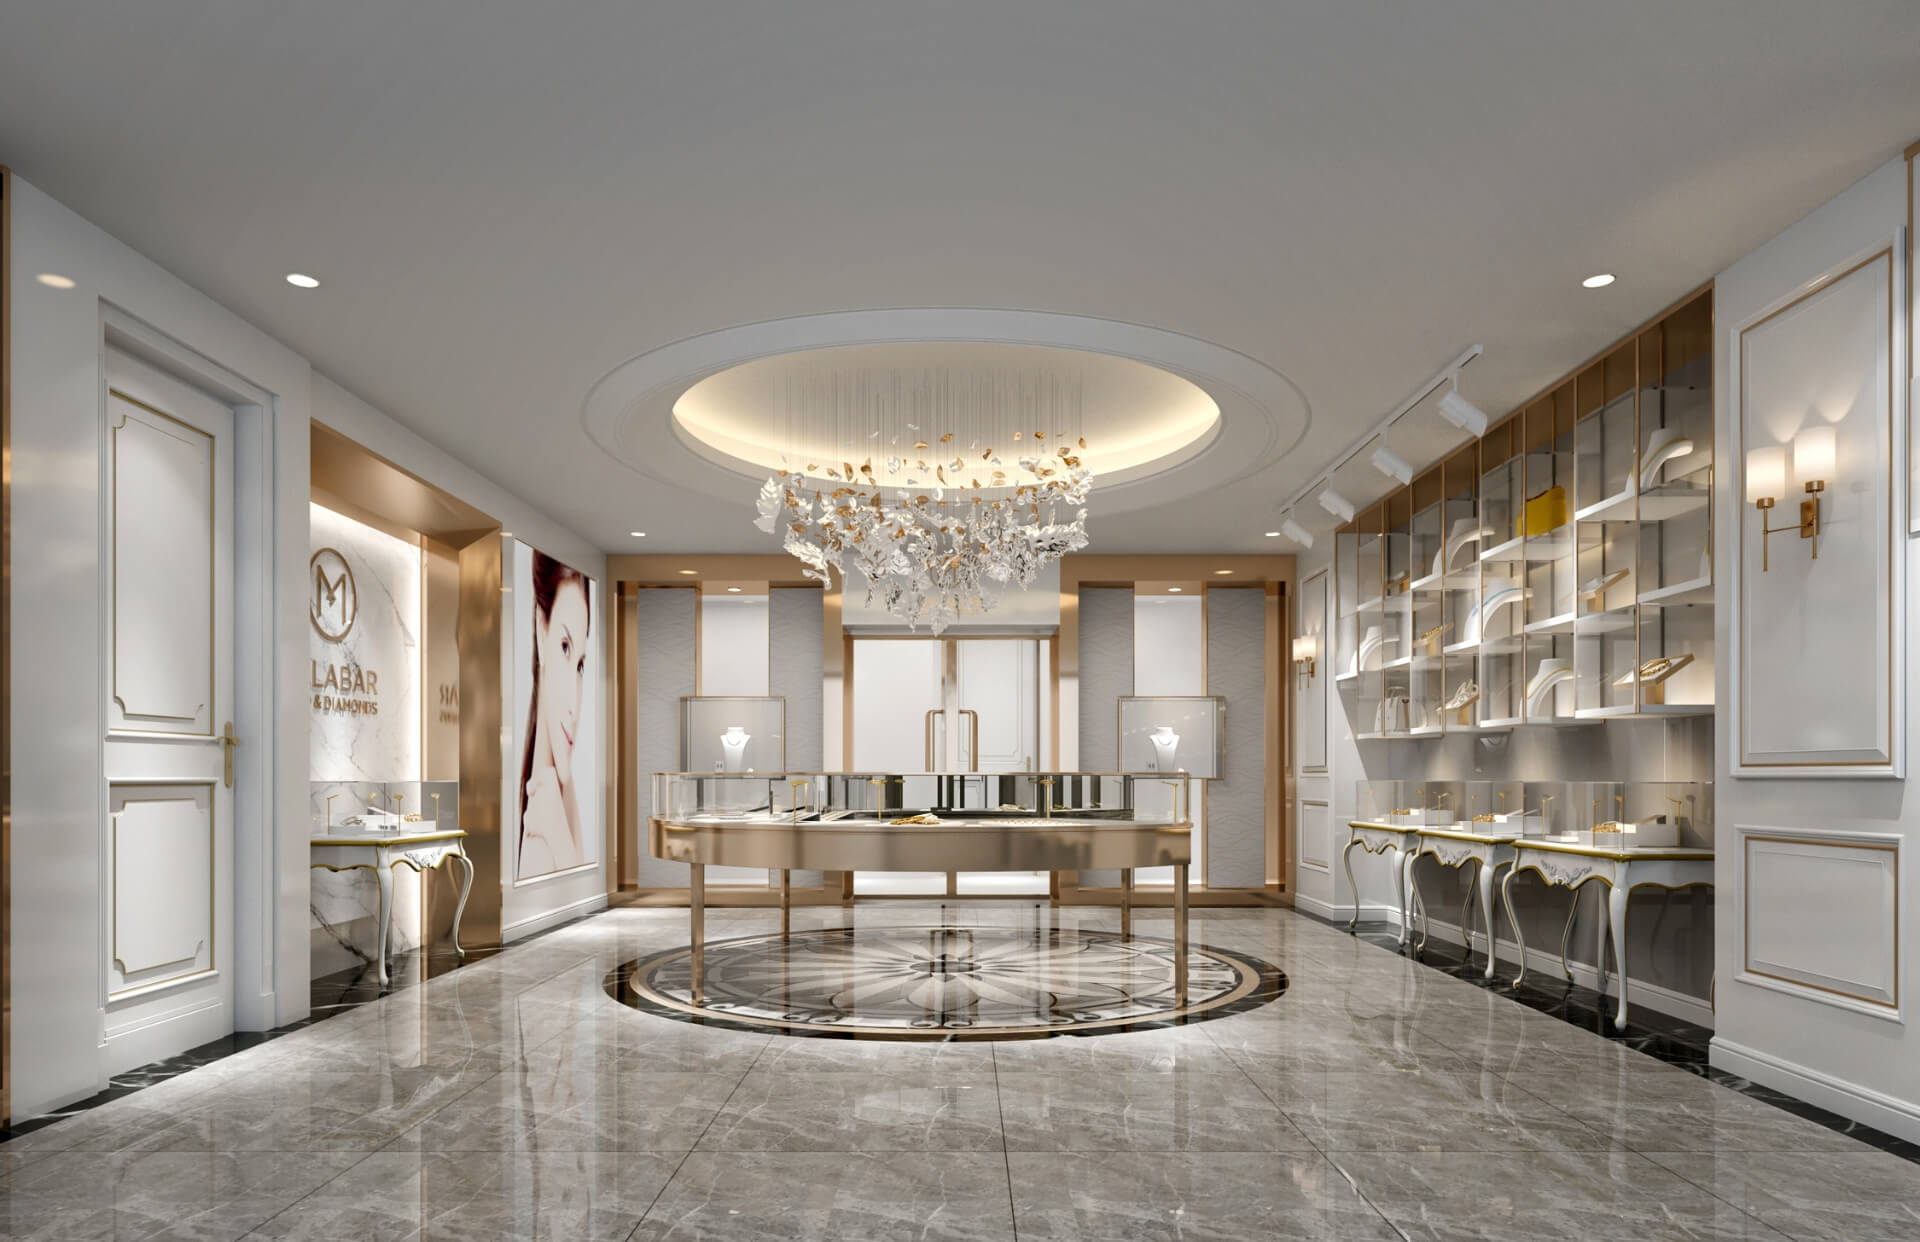 Modern and sleek jewelry store interior with precision-crafted fit-out and lighting